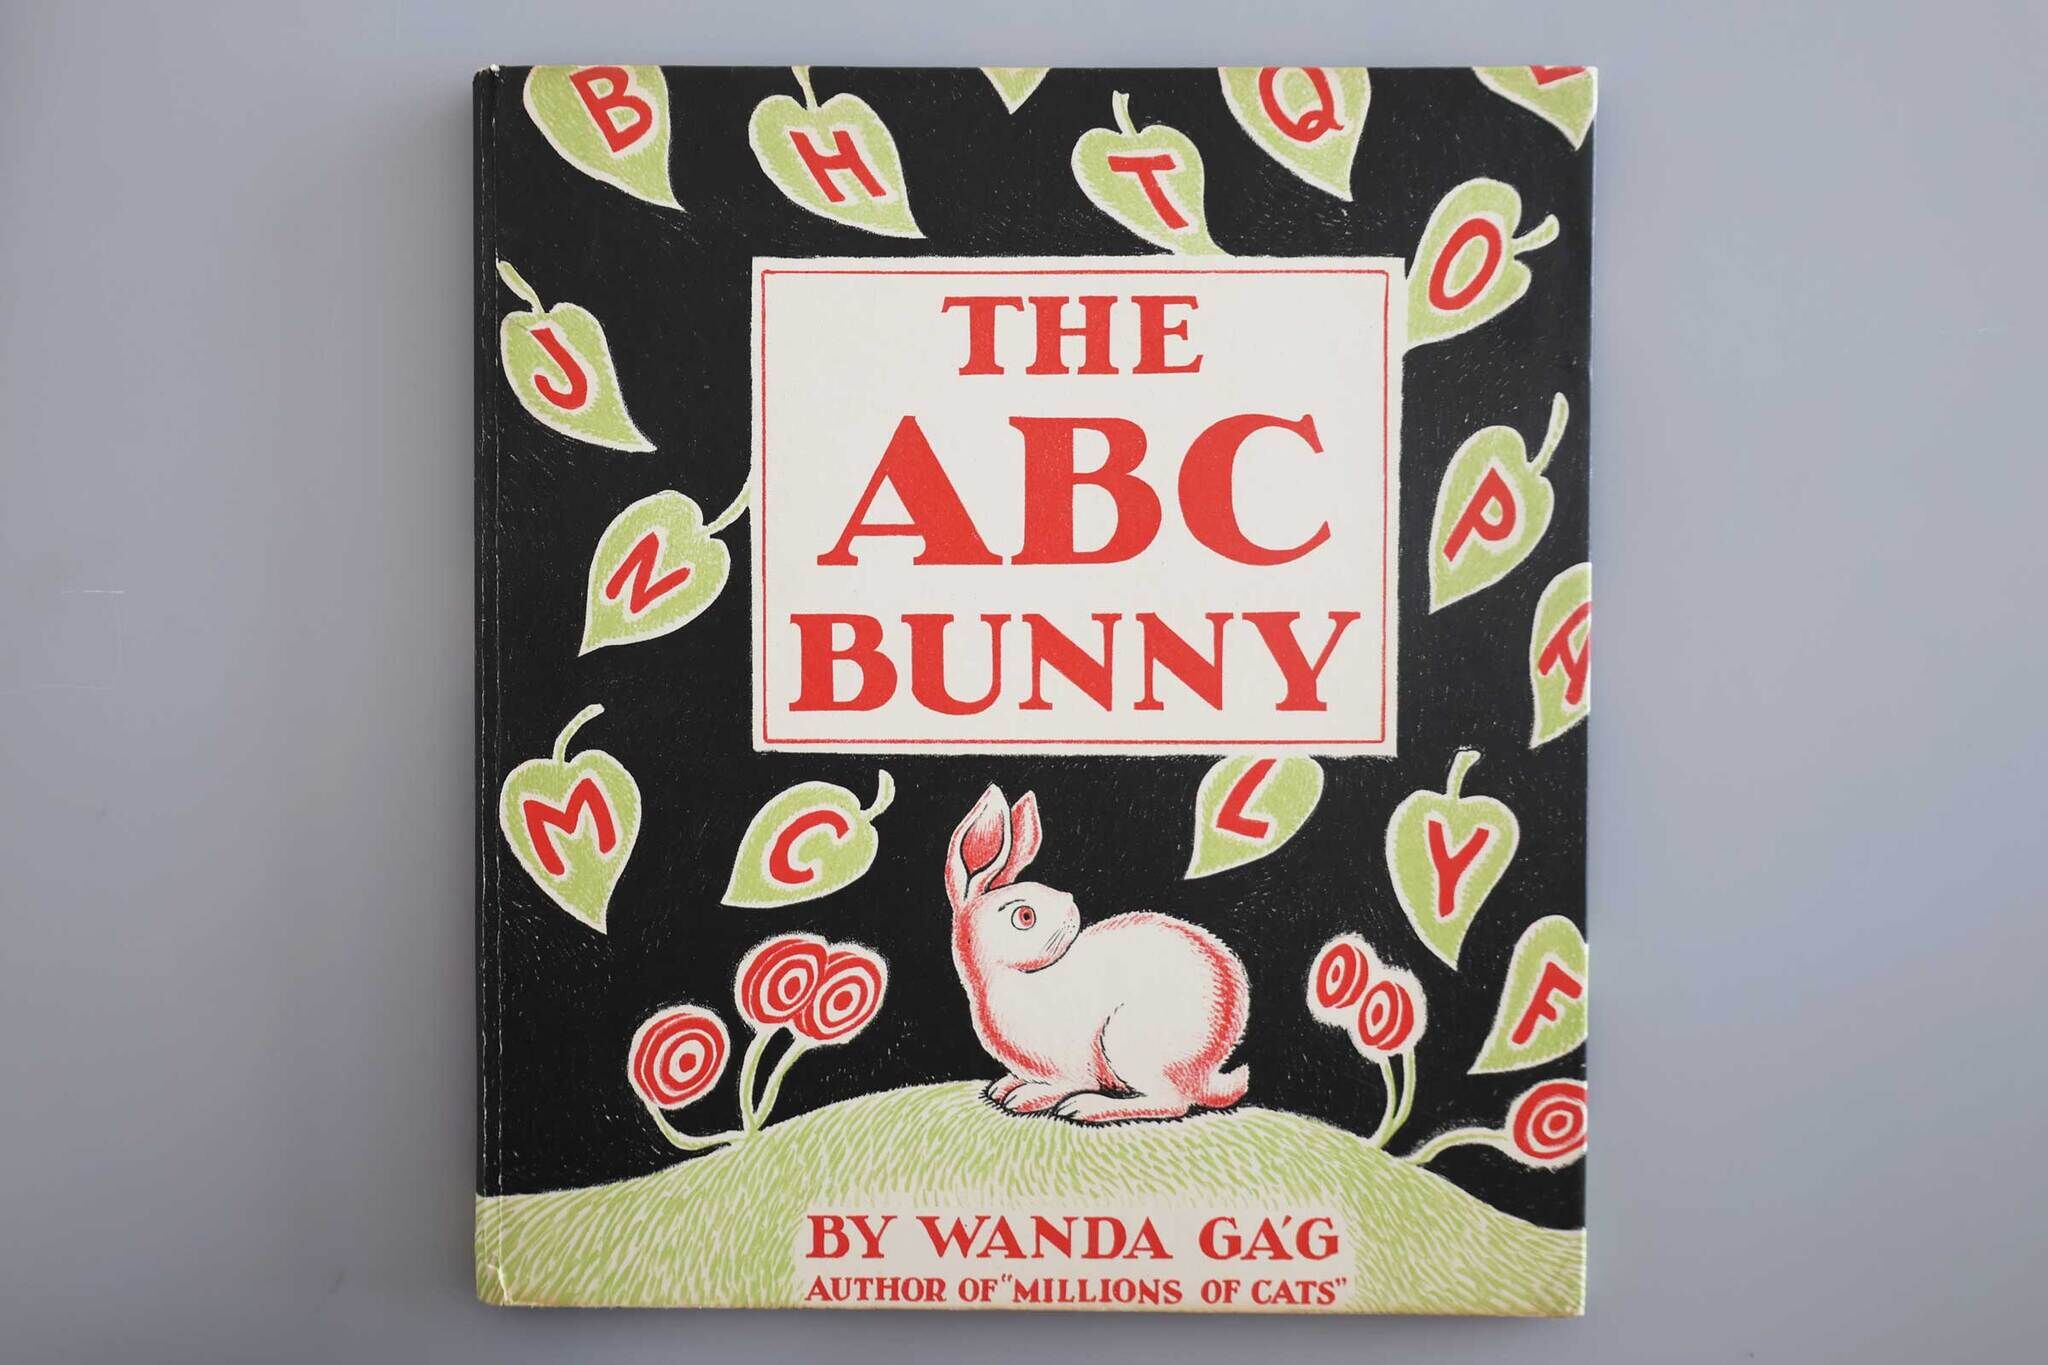 Cover of "The ABC Bunny" book by Wanda Gág with illustrations of a bunny, apples, and letters.